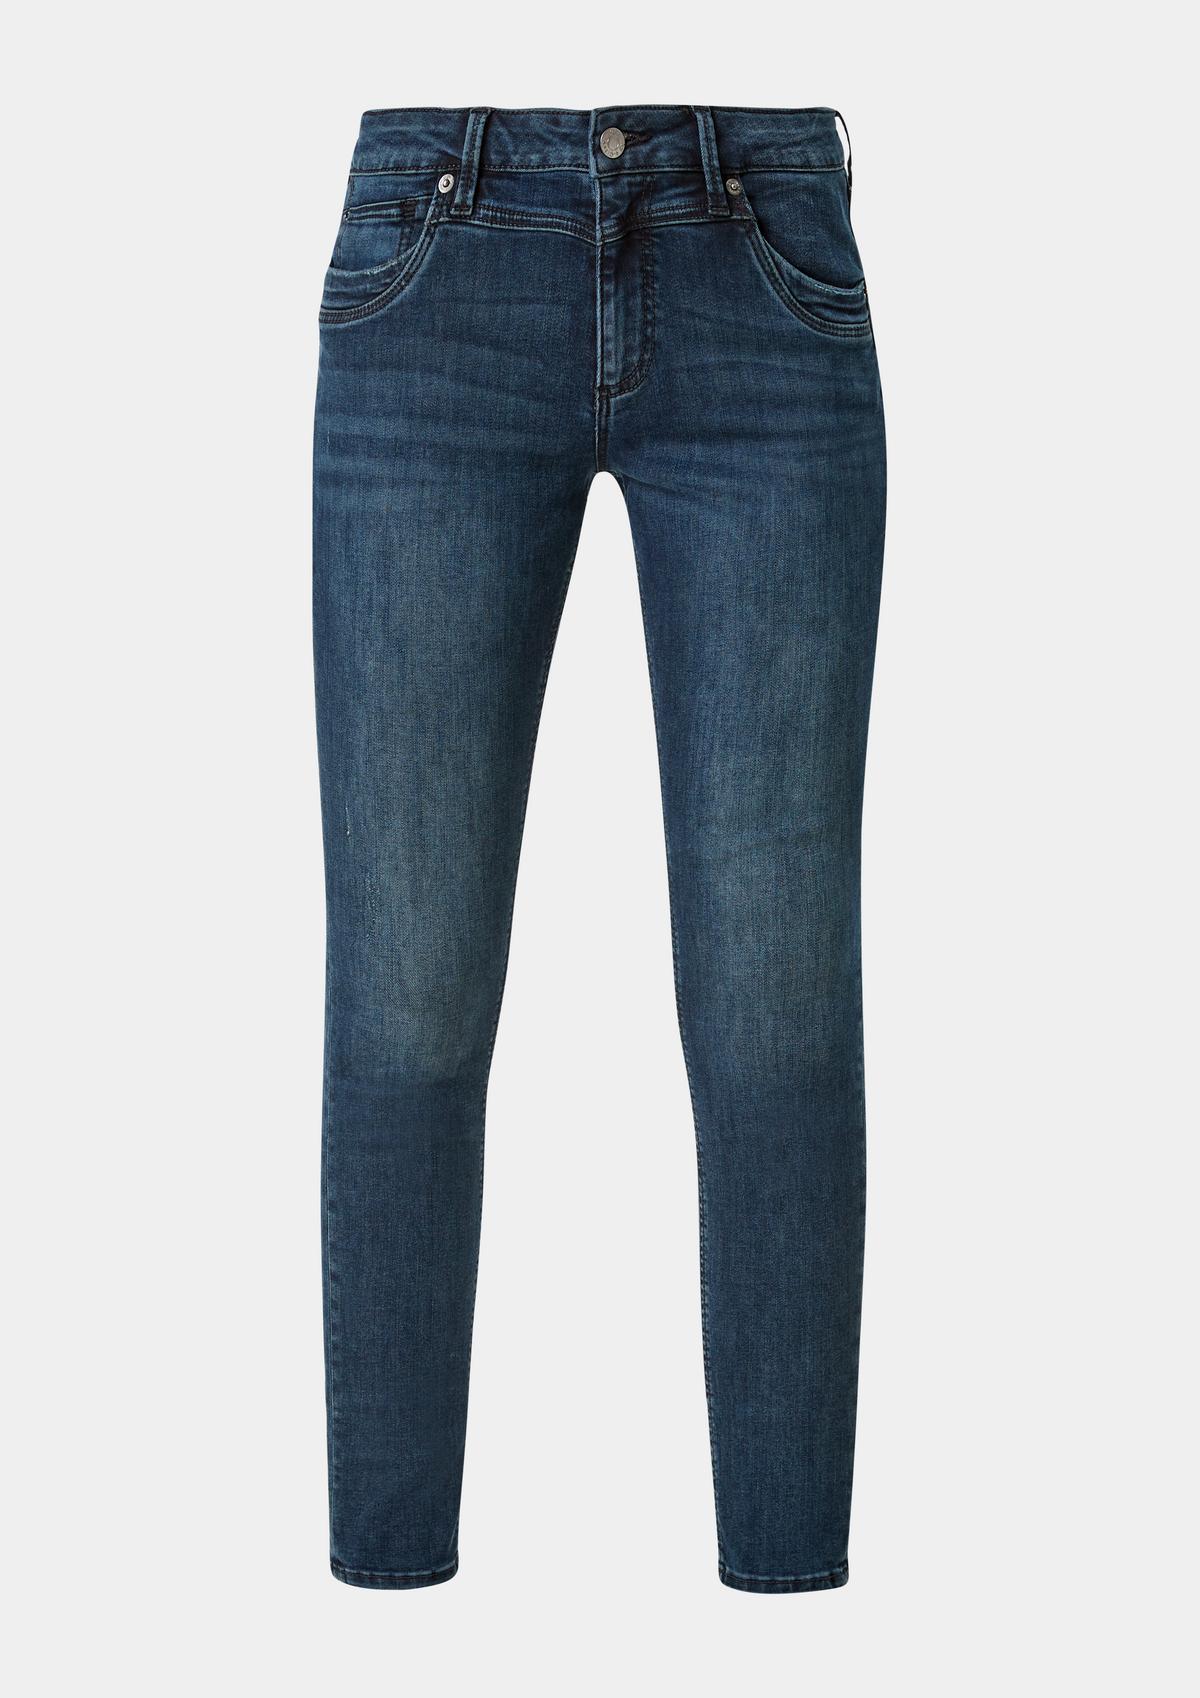 s.Oliver Skinny: blue jeans with a garment wash